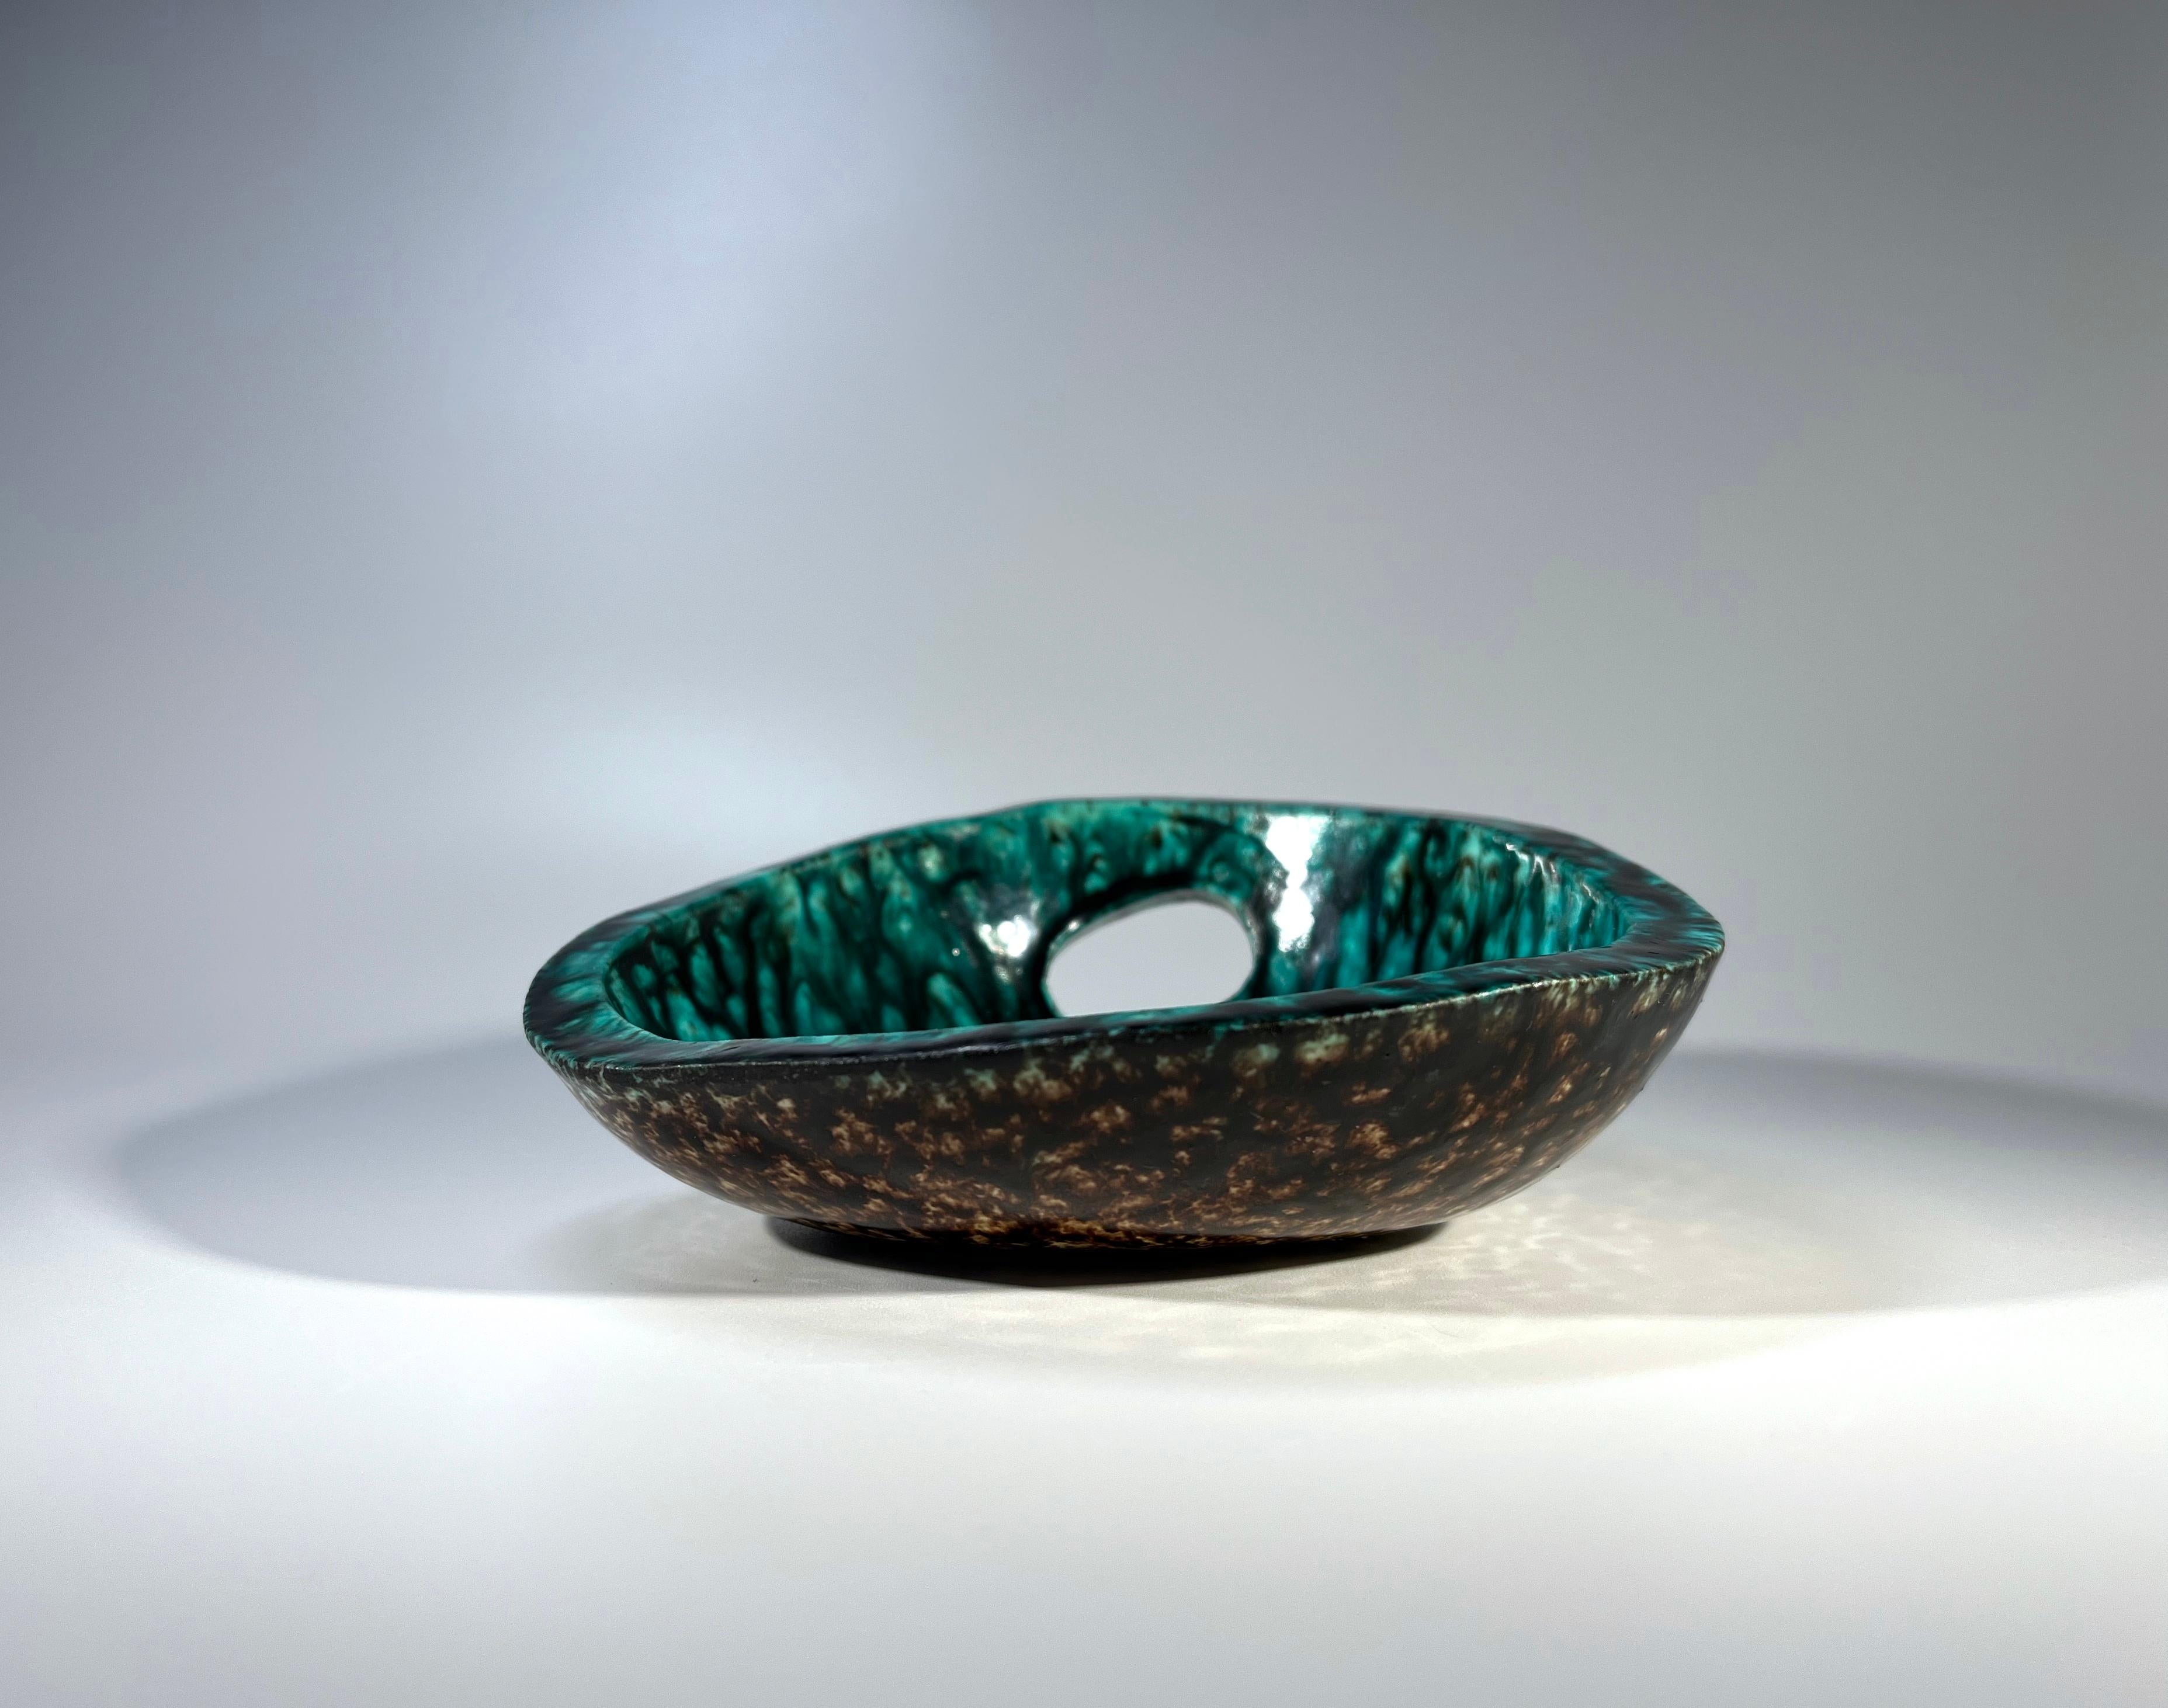 A magnificently vivid, mottled sea green glaze decorates the interior of this free form vide-poche from Accolay, France
The underside also benefits an equally wonderful rich dark brown mottled glaze
A super eye-catching piece from Accolay
Circa